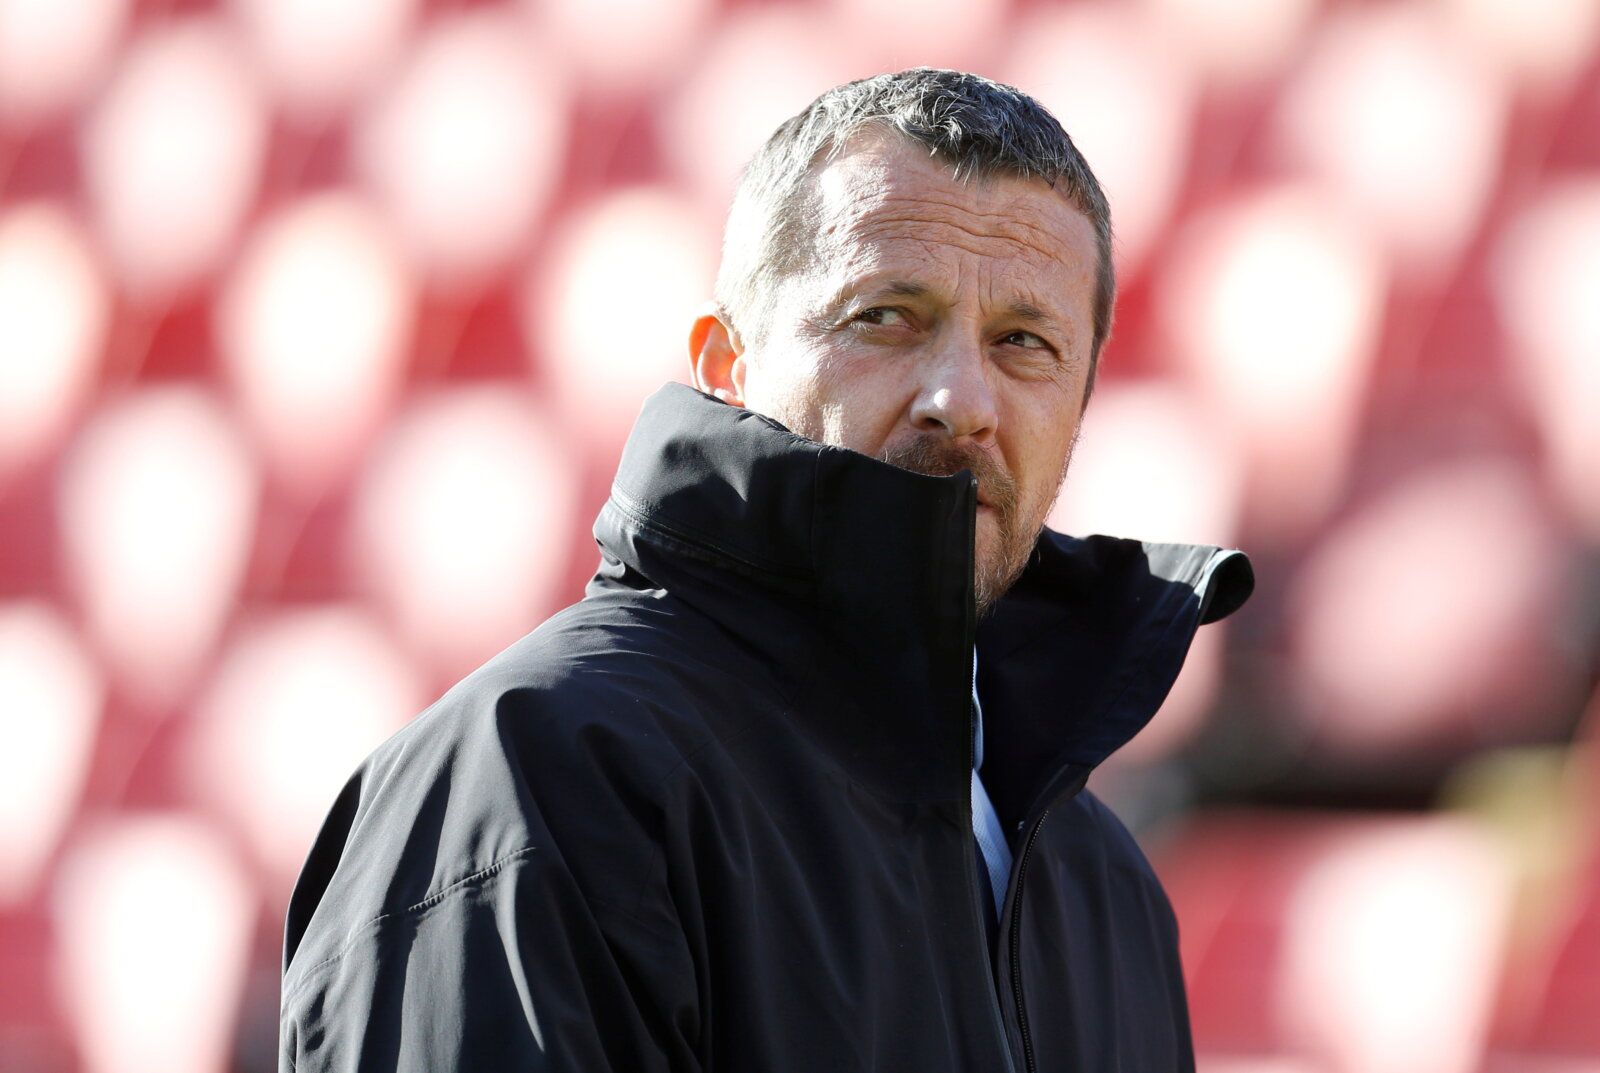 Soccer Football - Championship - Barnsley v Sheffield United - Oakwell, Barnsley, Britain - October 24, 2021 Sheffield United manager Slavisa Jokanovic Action Images/Ed Sykes  EDITORIAL USE ONLY. No use with unauthorized audio, video, data, fixture lists, club/league logos or 